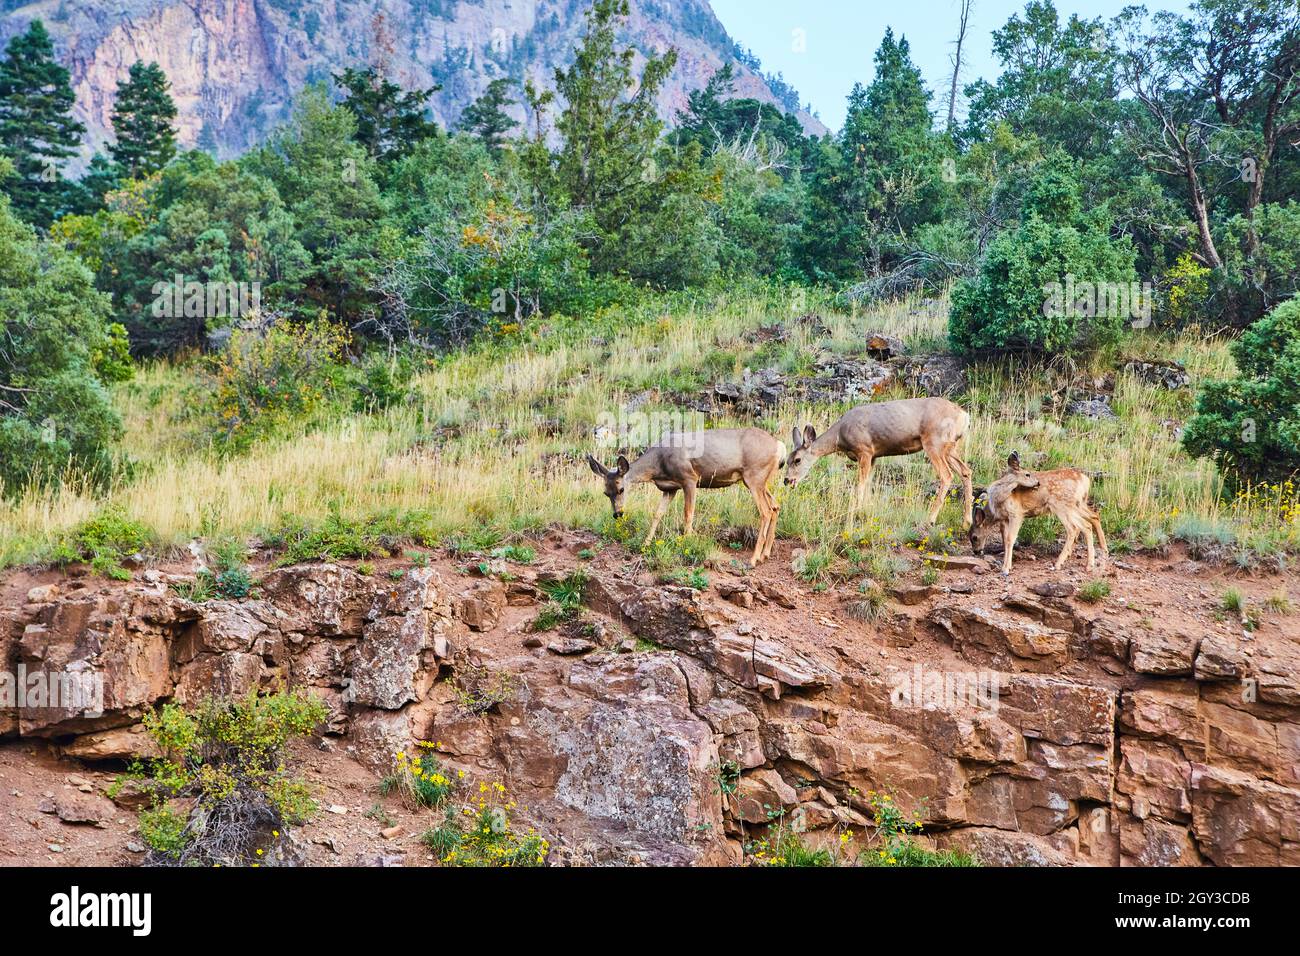 Group of deer at top of cliffy hill with mountain in distance Stock Photo